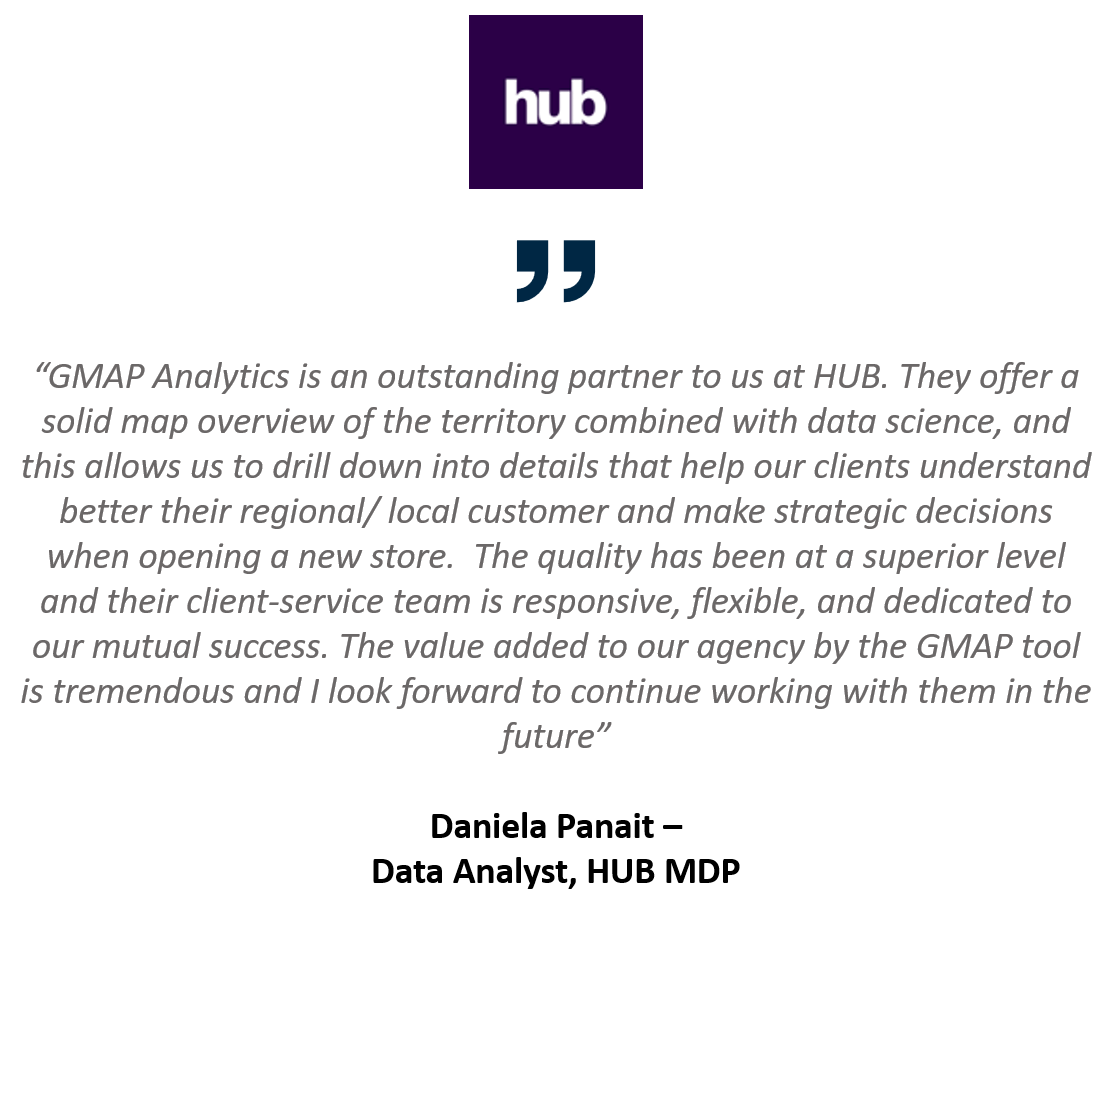 Marketing agency Hub use MVPLUS catchment tools to help their clients target customers when creating a location planning strategy